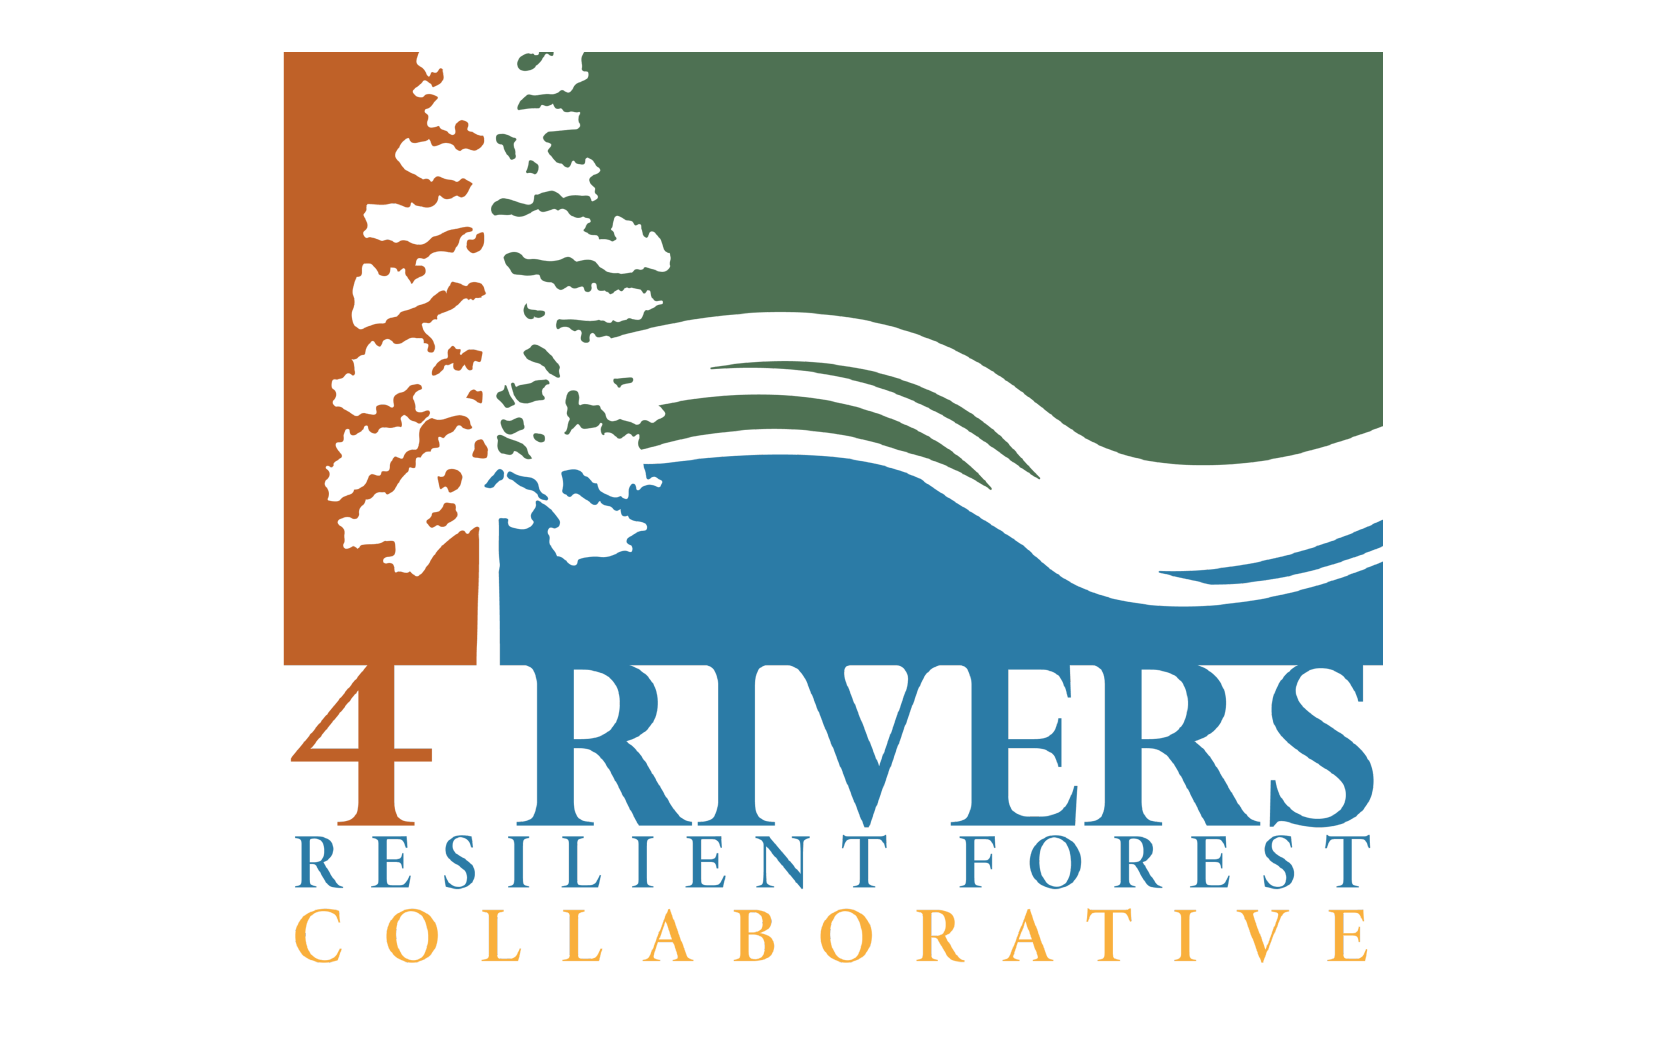 4 Rivers Resilient Forest Collaborative logo